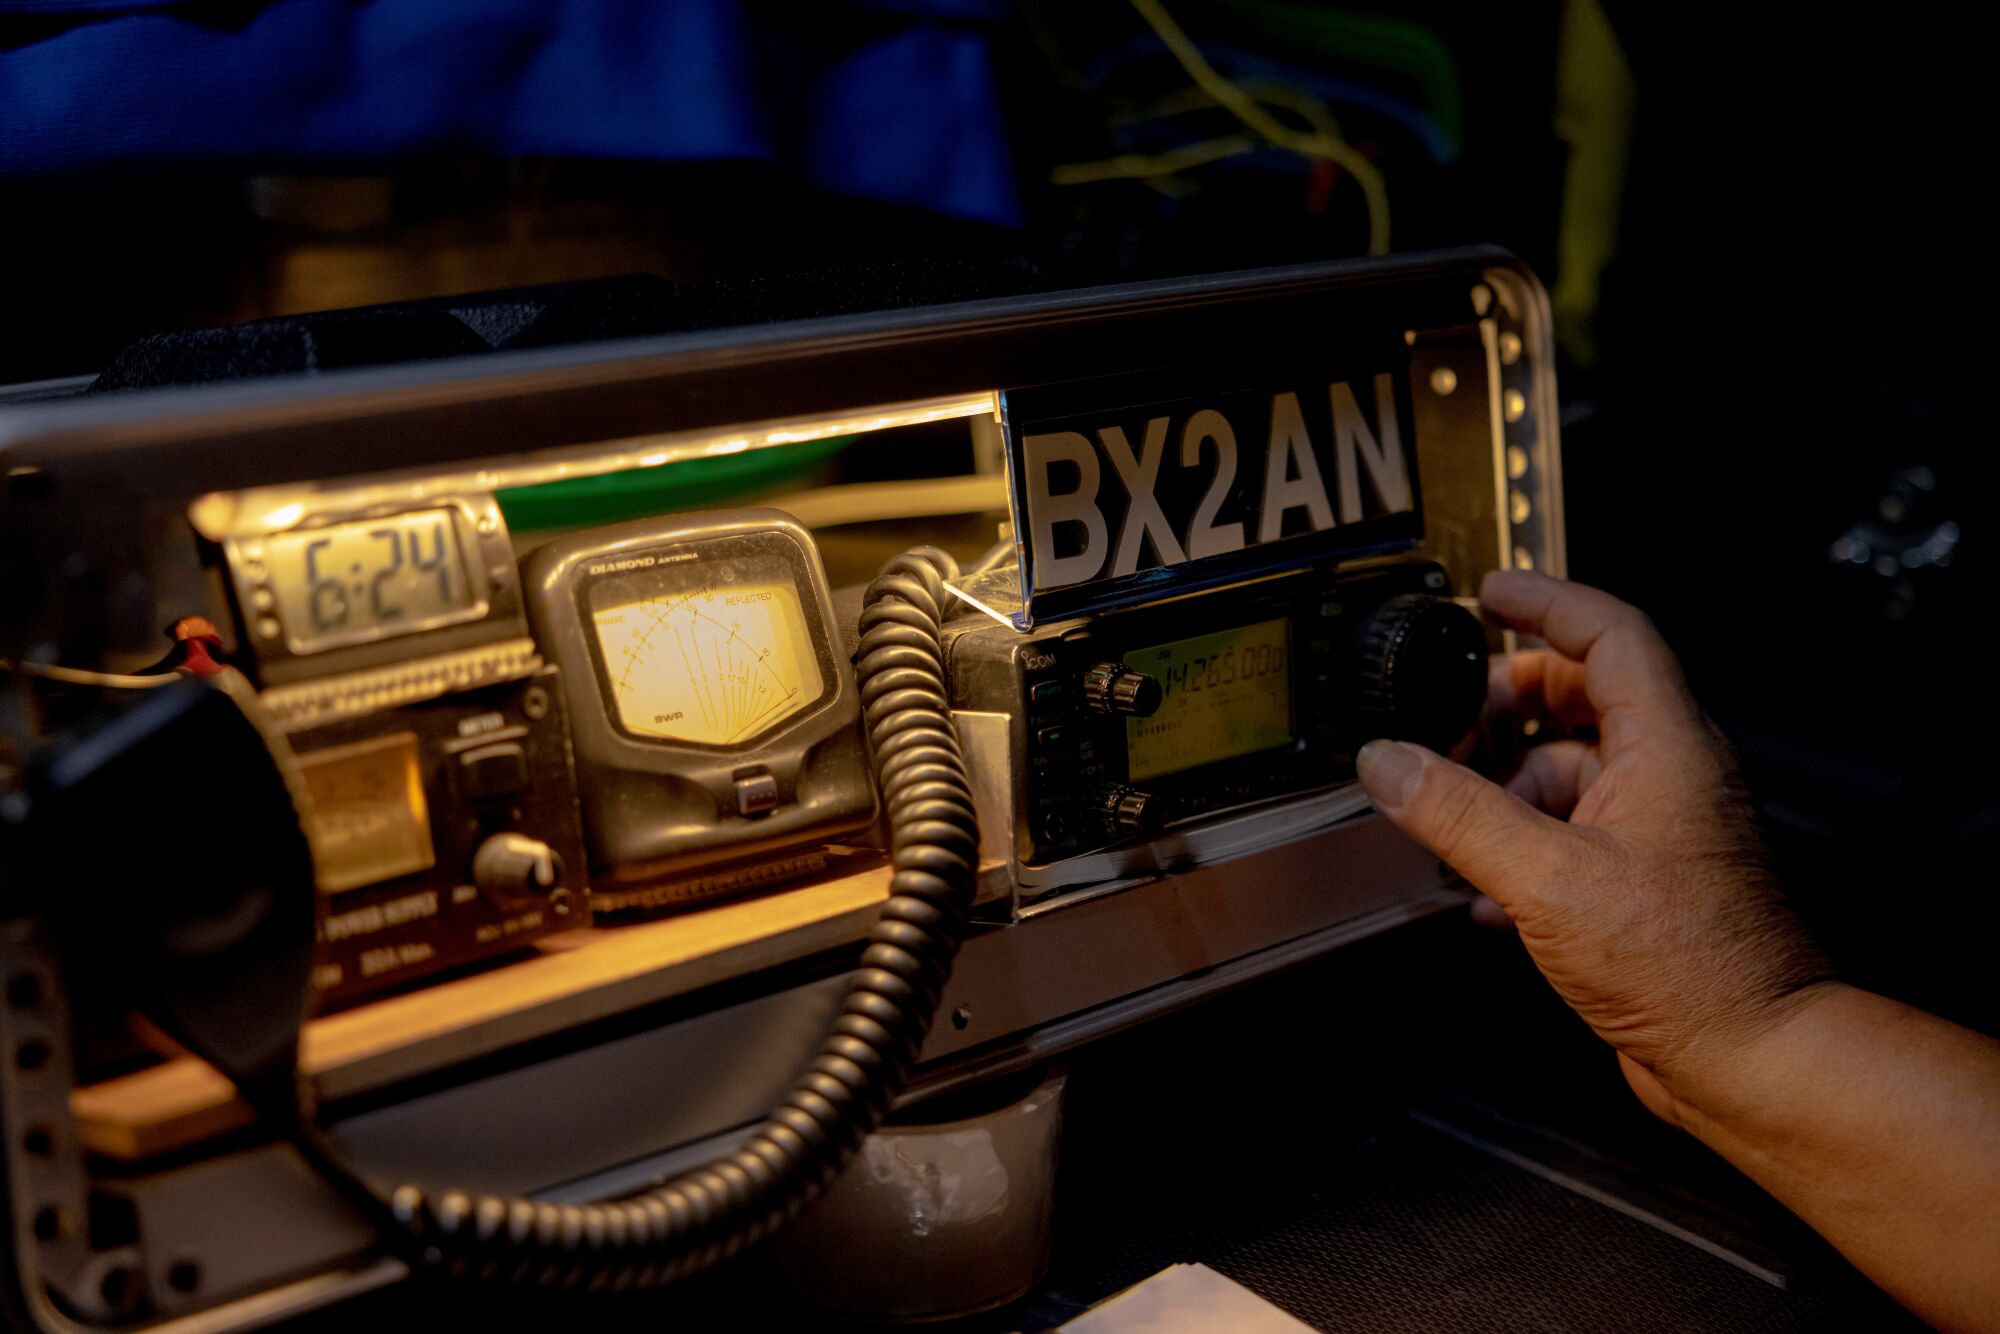 A hand adjusts the knob on a machine with various screens and a sign that reads "BX2AN"